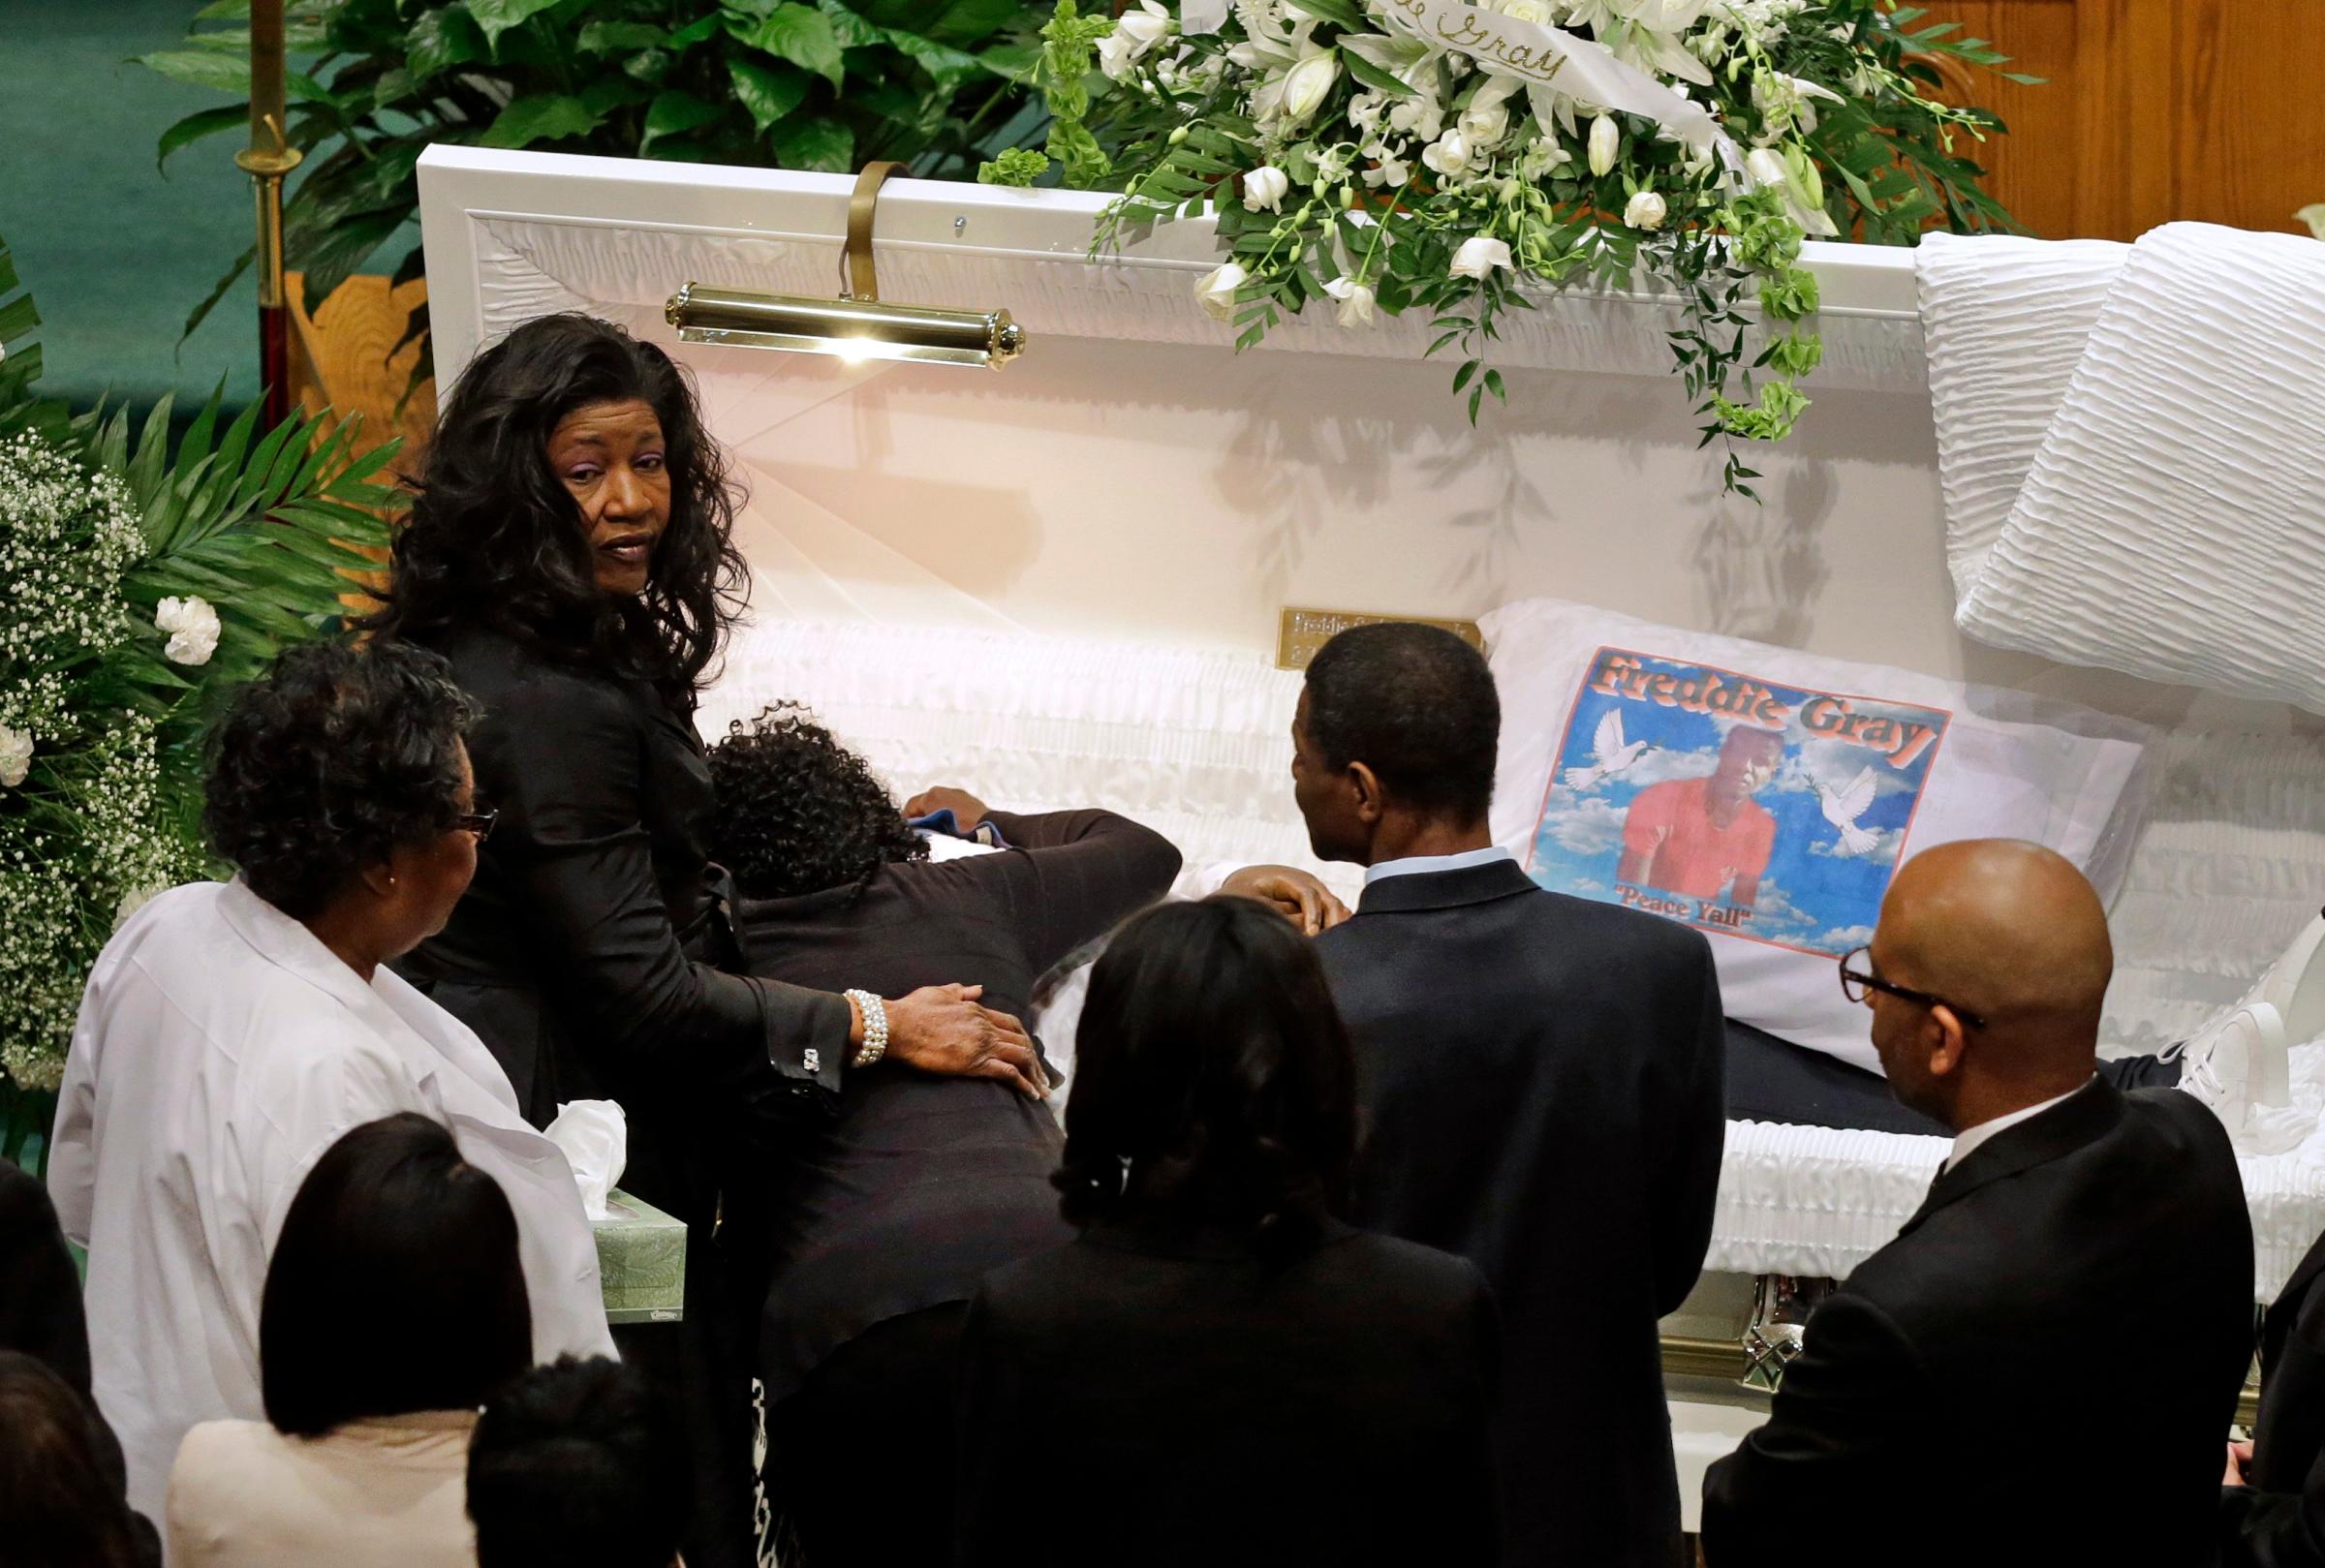 Gloria Darden, mother of Freddie Gray, is comforted as she embraces his body before his funeral at New Shiloh Baptist Church in Baltimore on April 27, 2015.